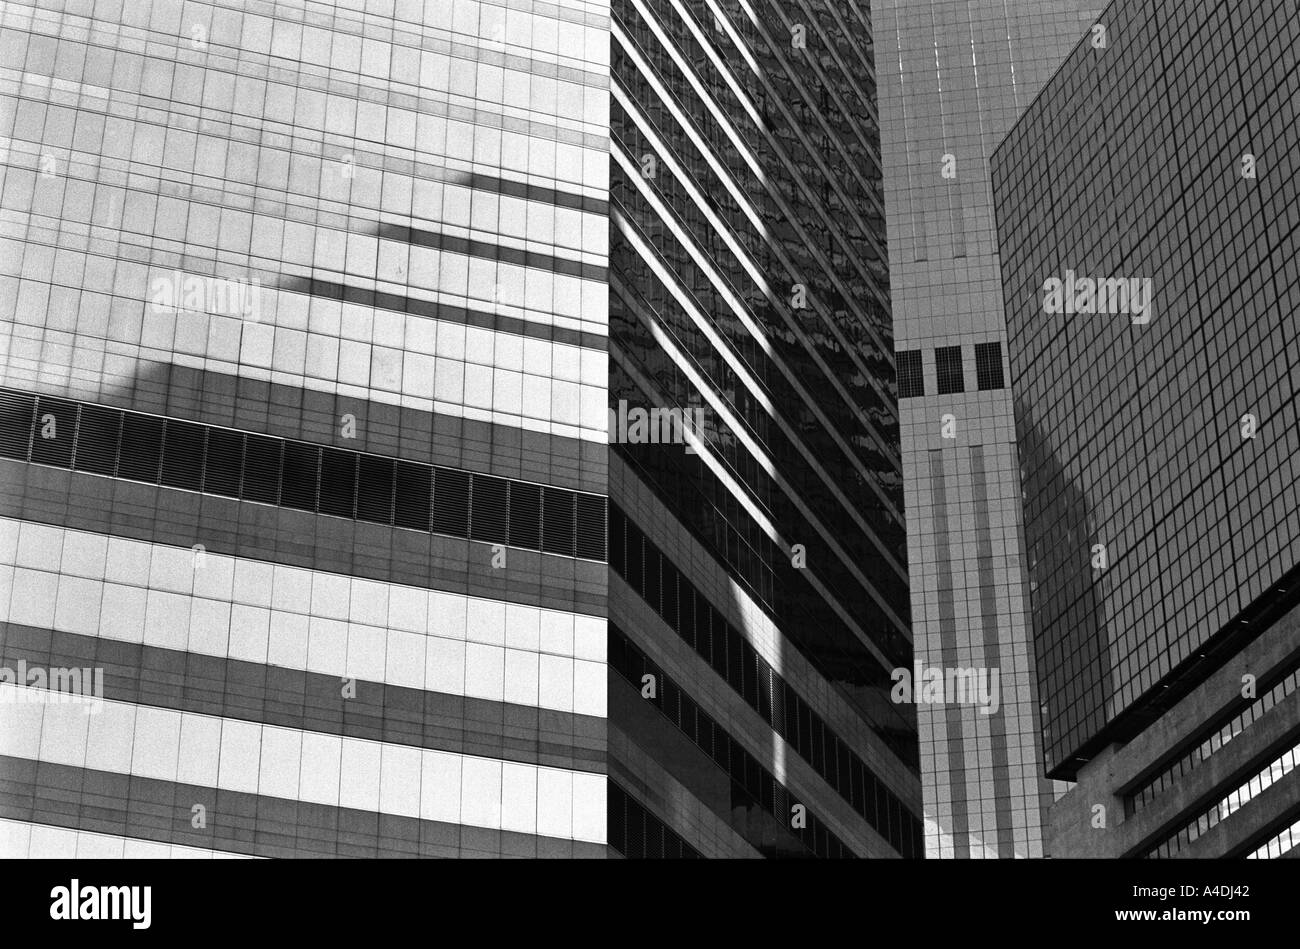 Buildings reflected in the windows of another one. Hong Kong, Peoples' Republic of China, HKSAR Stock Photo